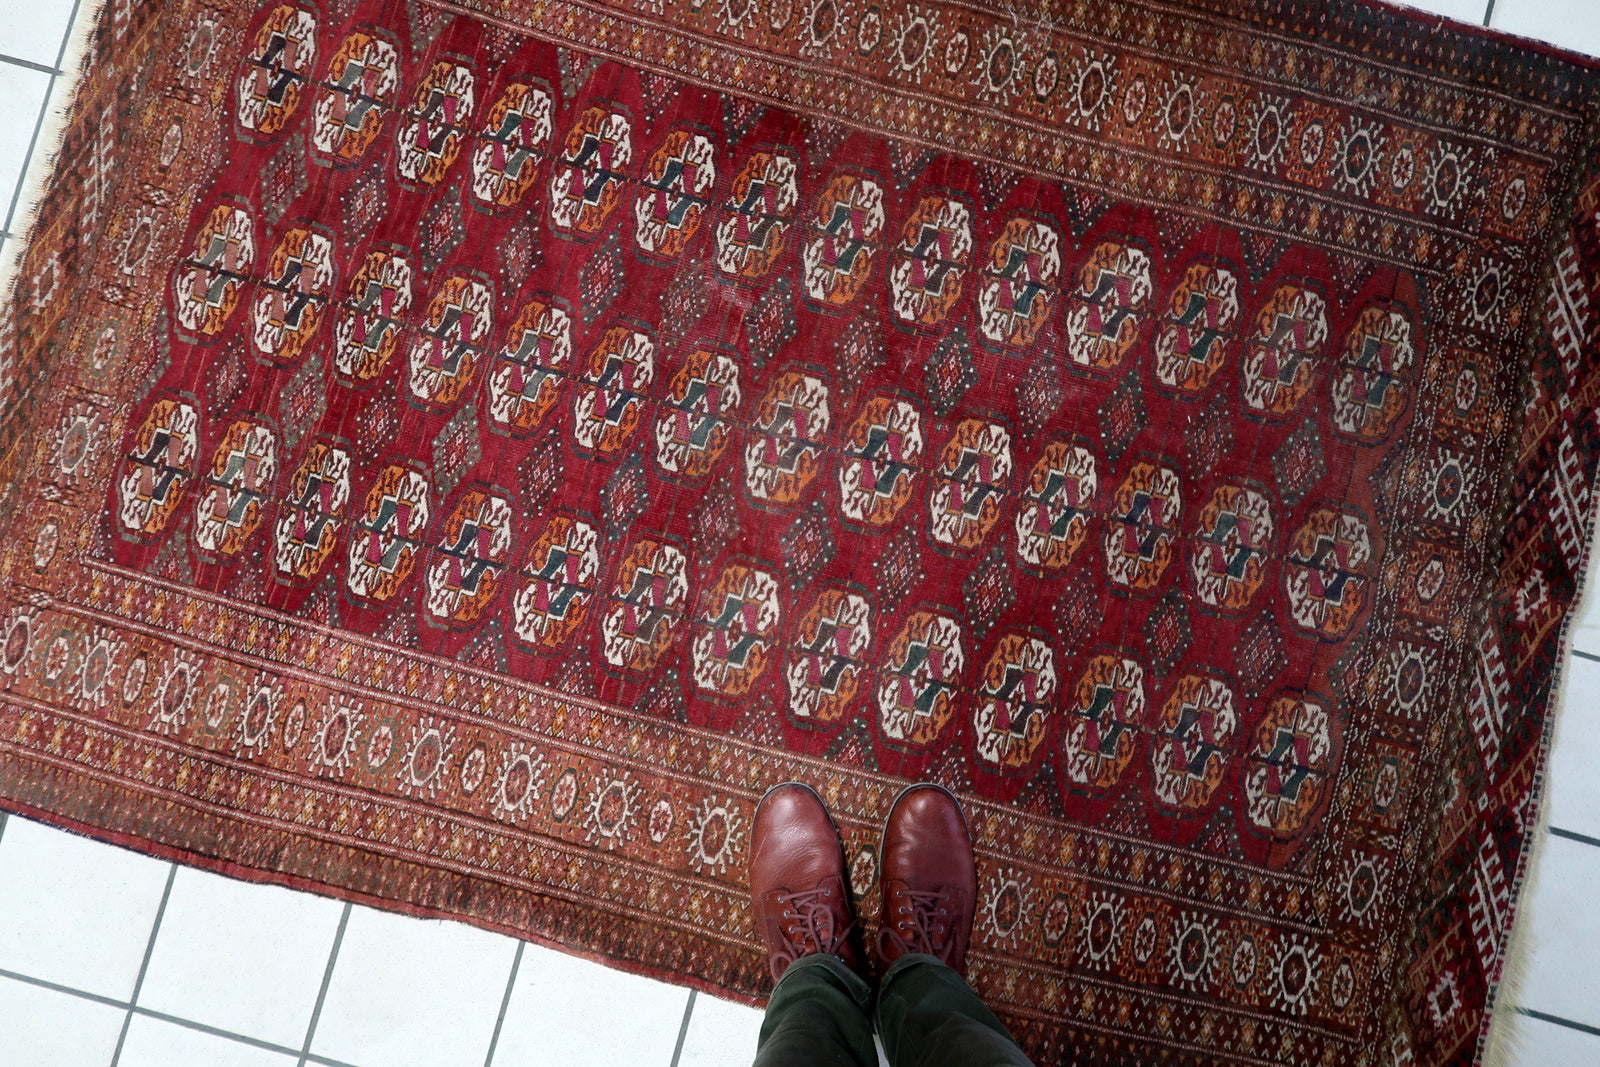 Detailed view of the wool material and texture on the Handmade Vintage Uzbek Bukhara Rug